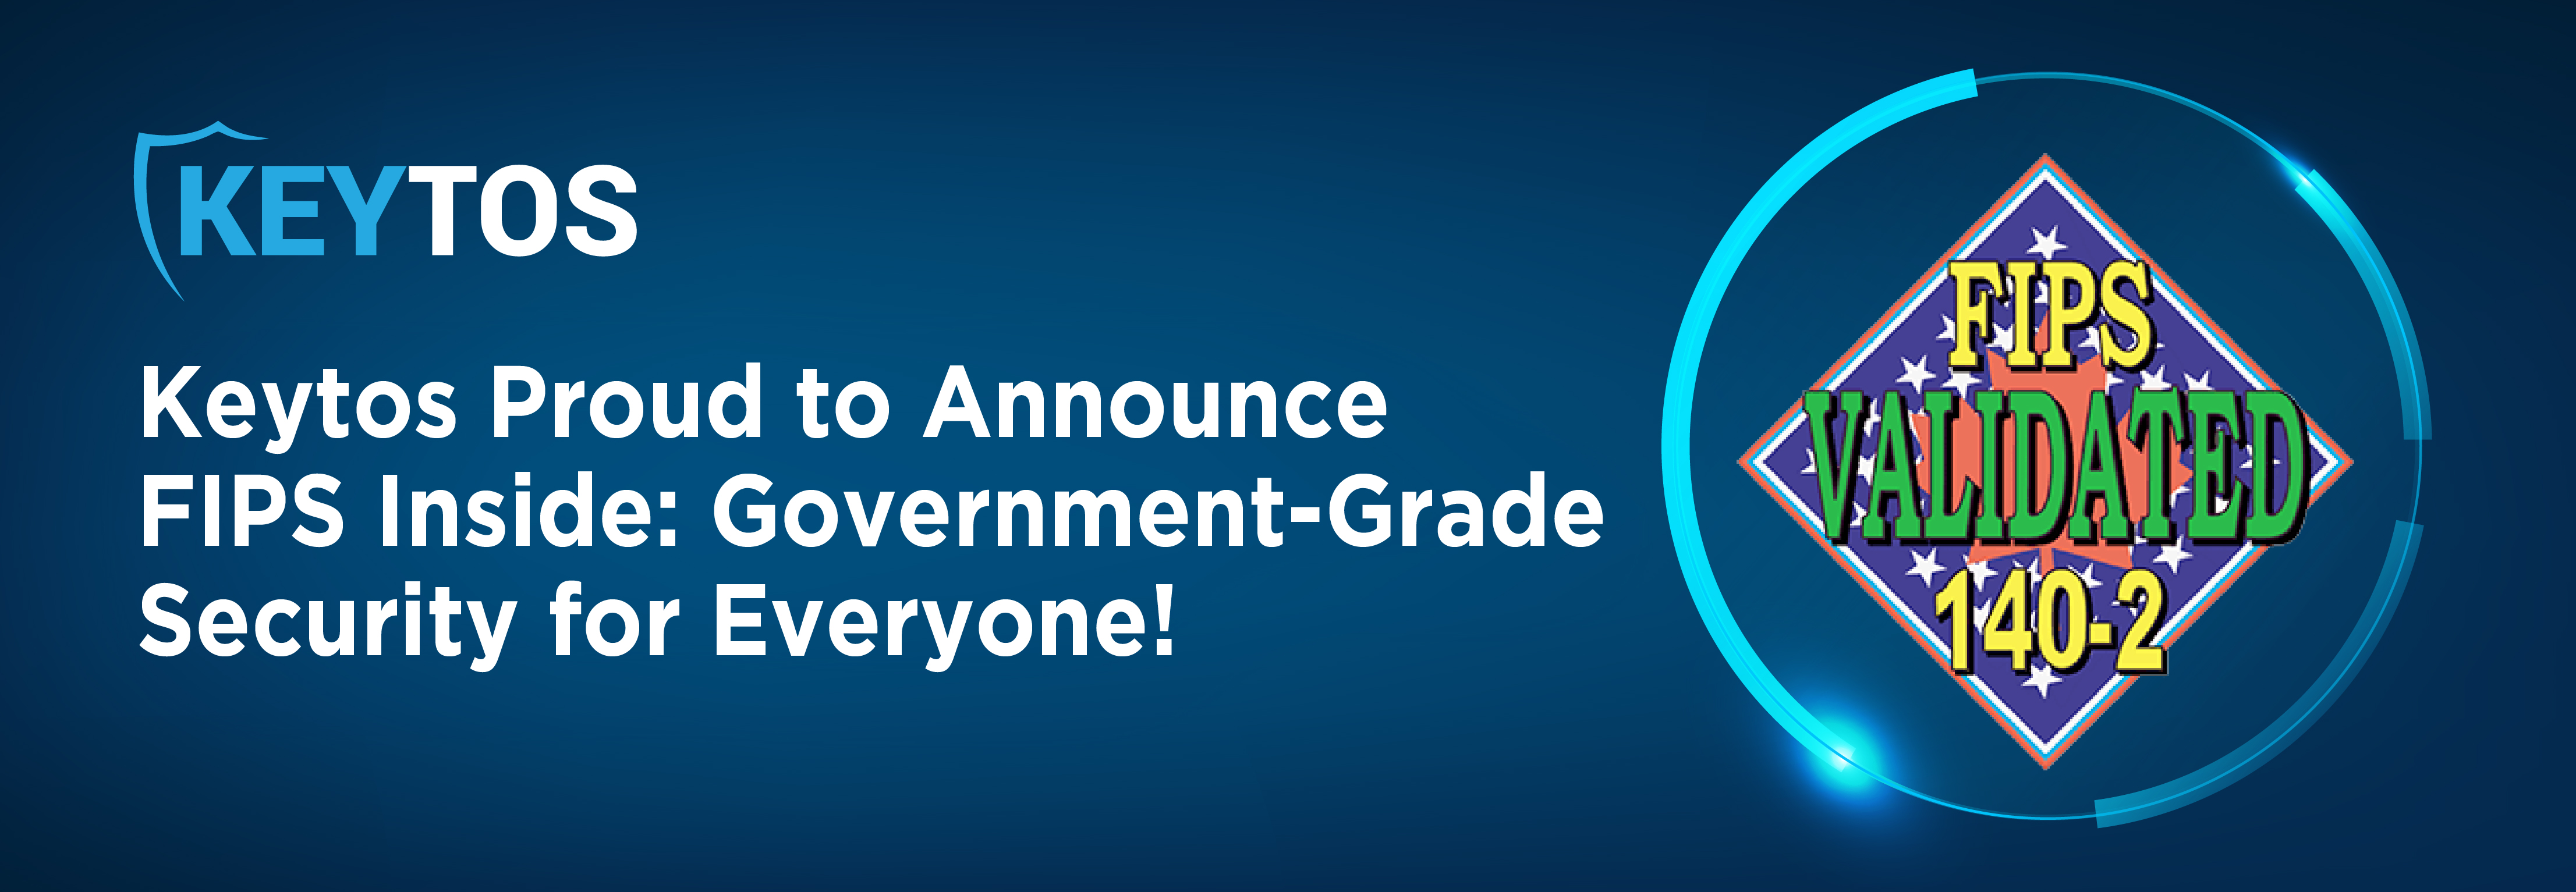 Keytos is Proud to Announce FIPS Inside - Government-Grade Security for All!